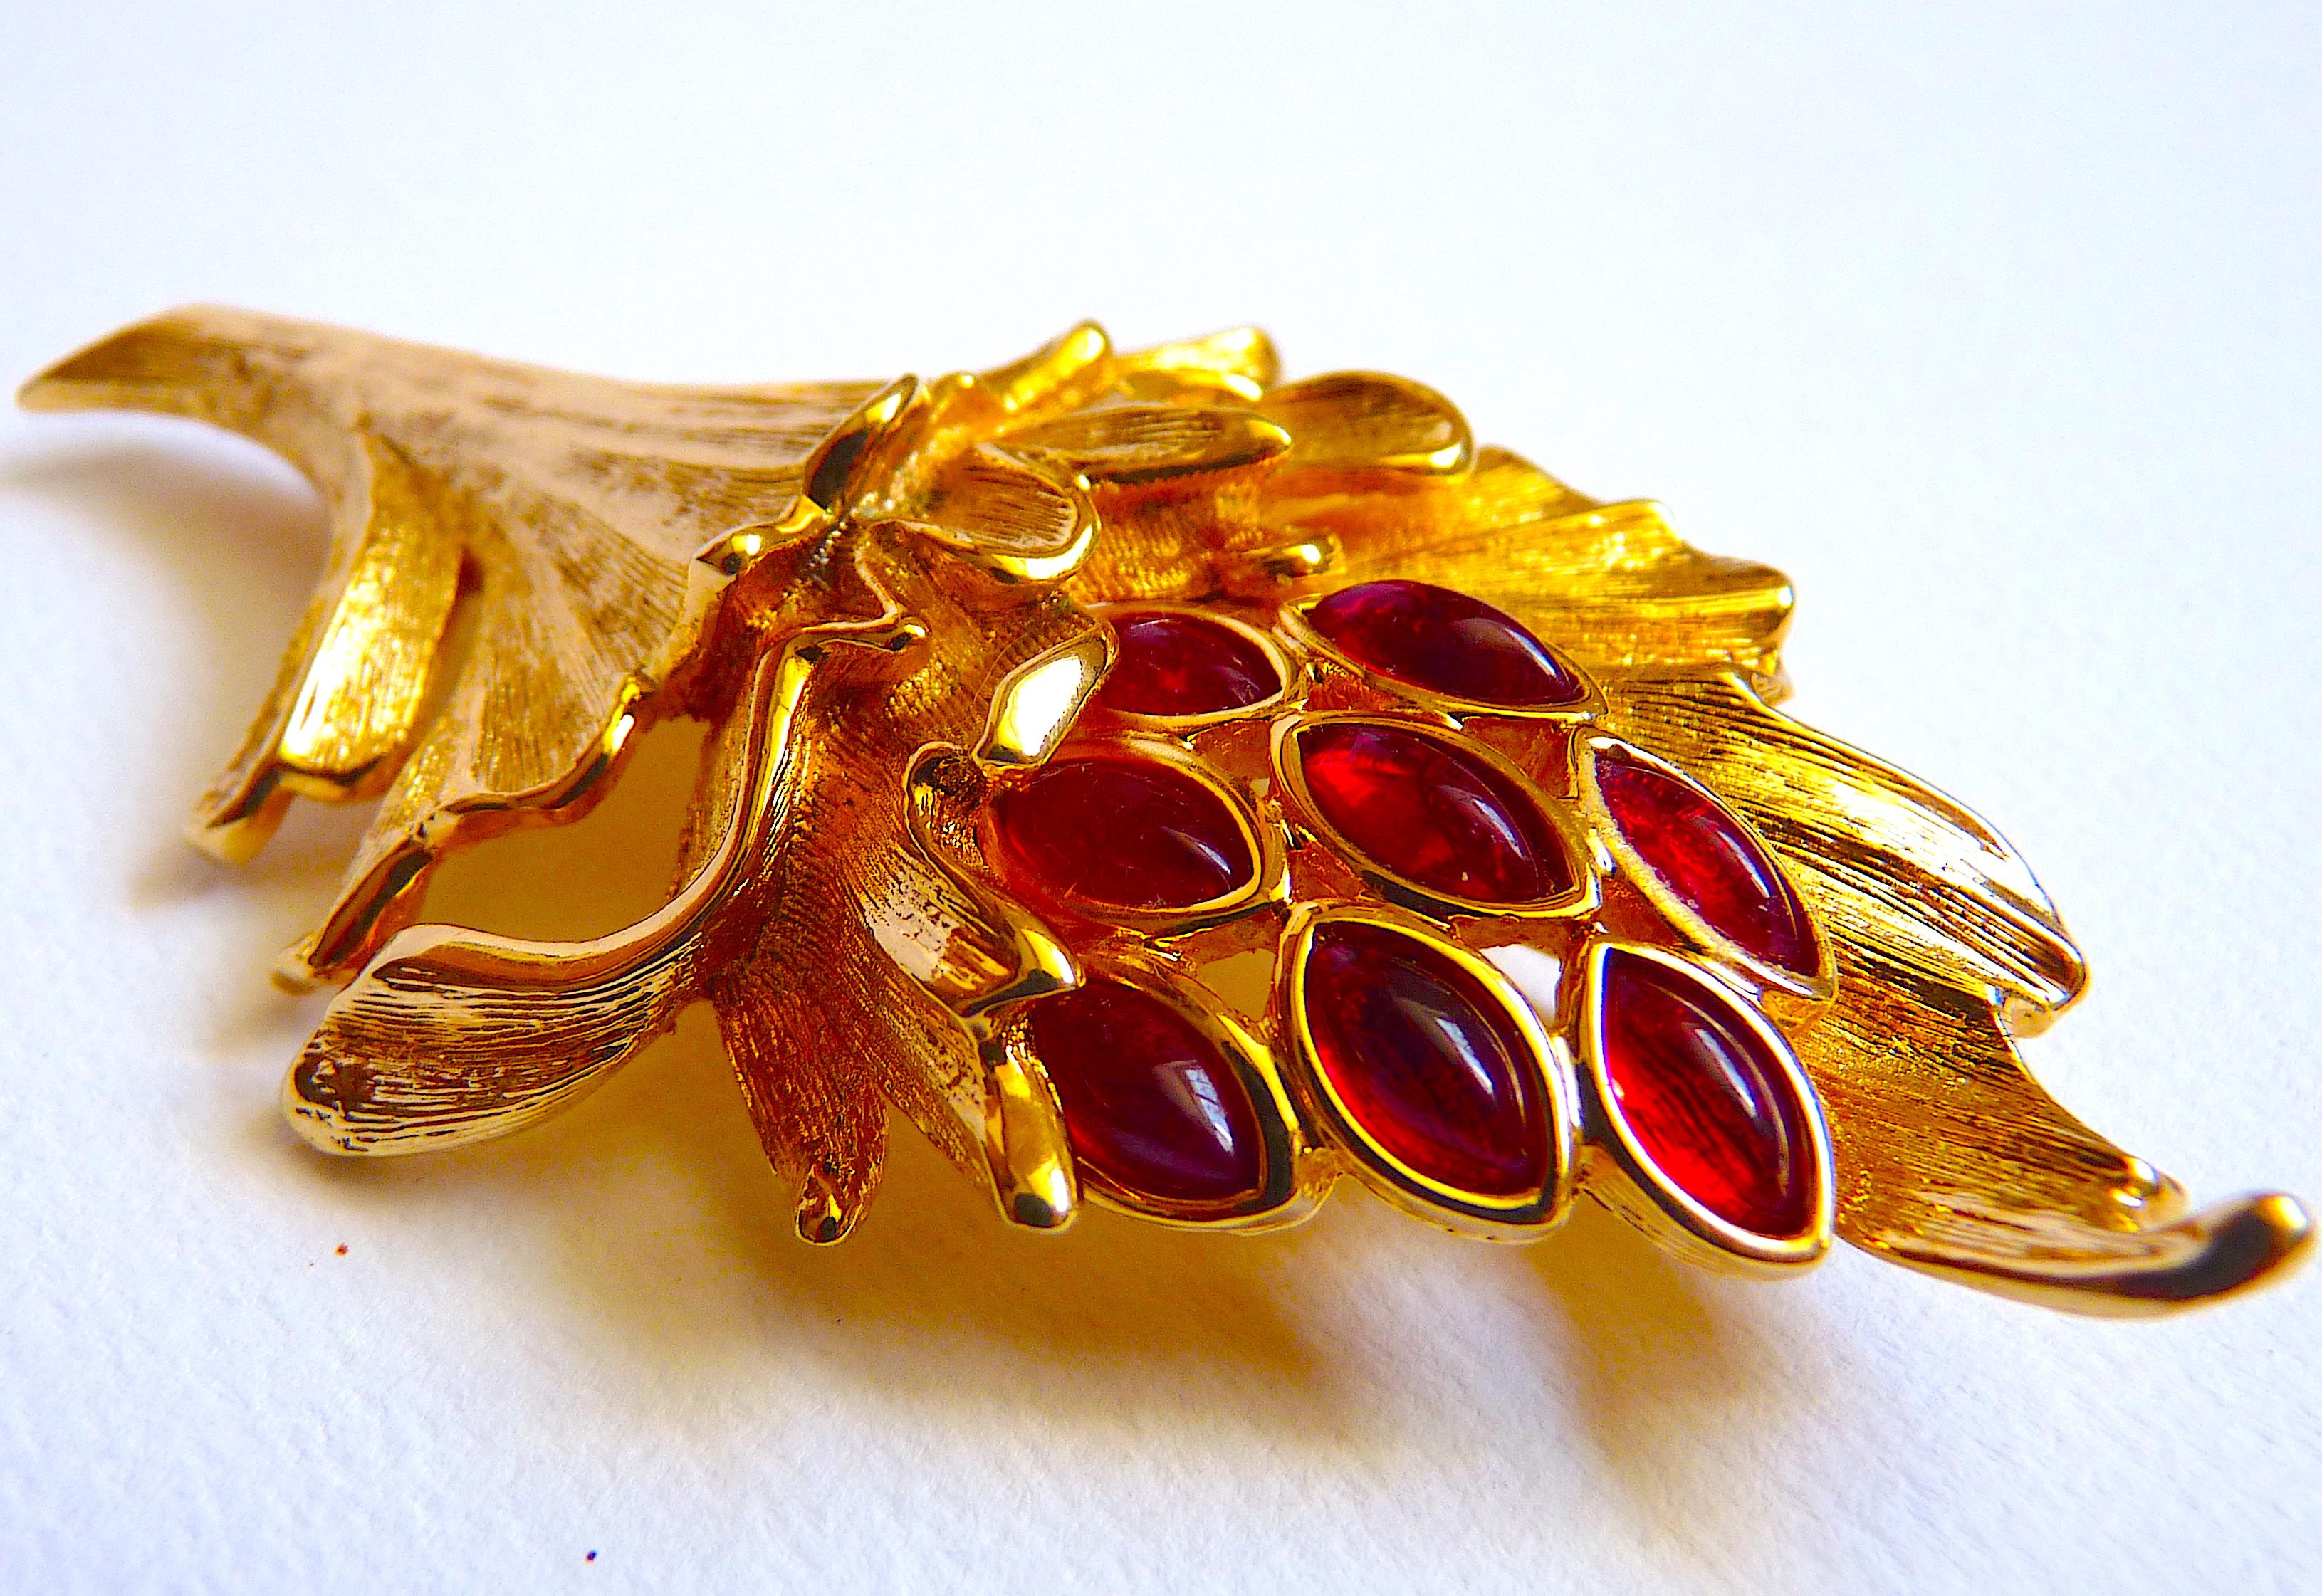 This is a GROSSE signed Brooch in gold tone metal and Red Stones, Vintage from the 1960s. 

Signed GROSSE at back

From the 1950s to the 1980s, Grosse Germany factory produced costume jewelry and french haute couture jewelry for Christian Dior and